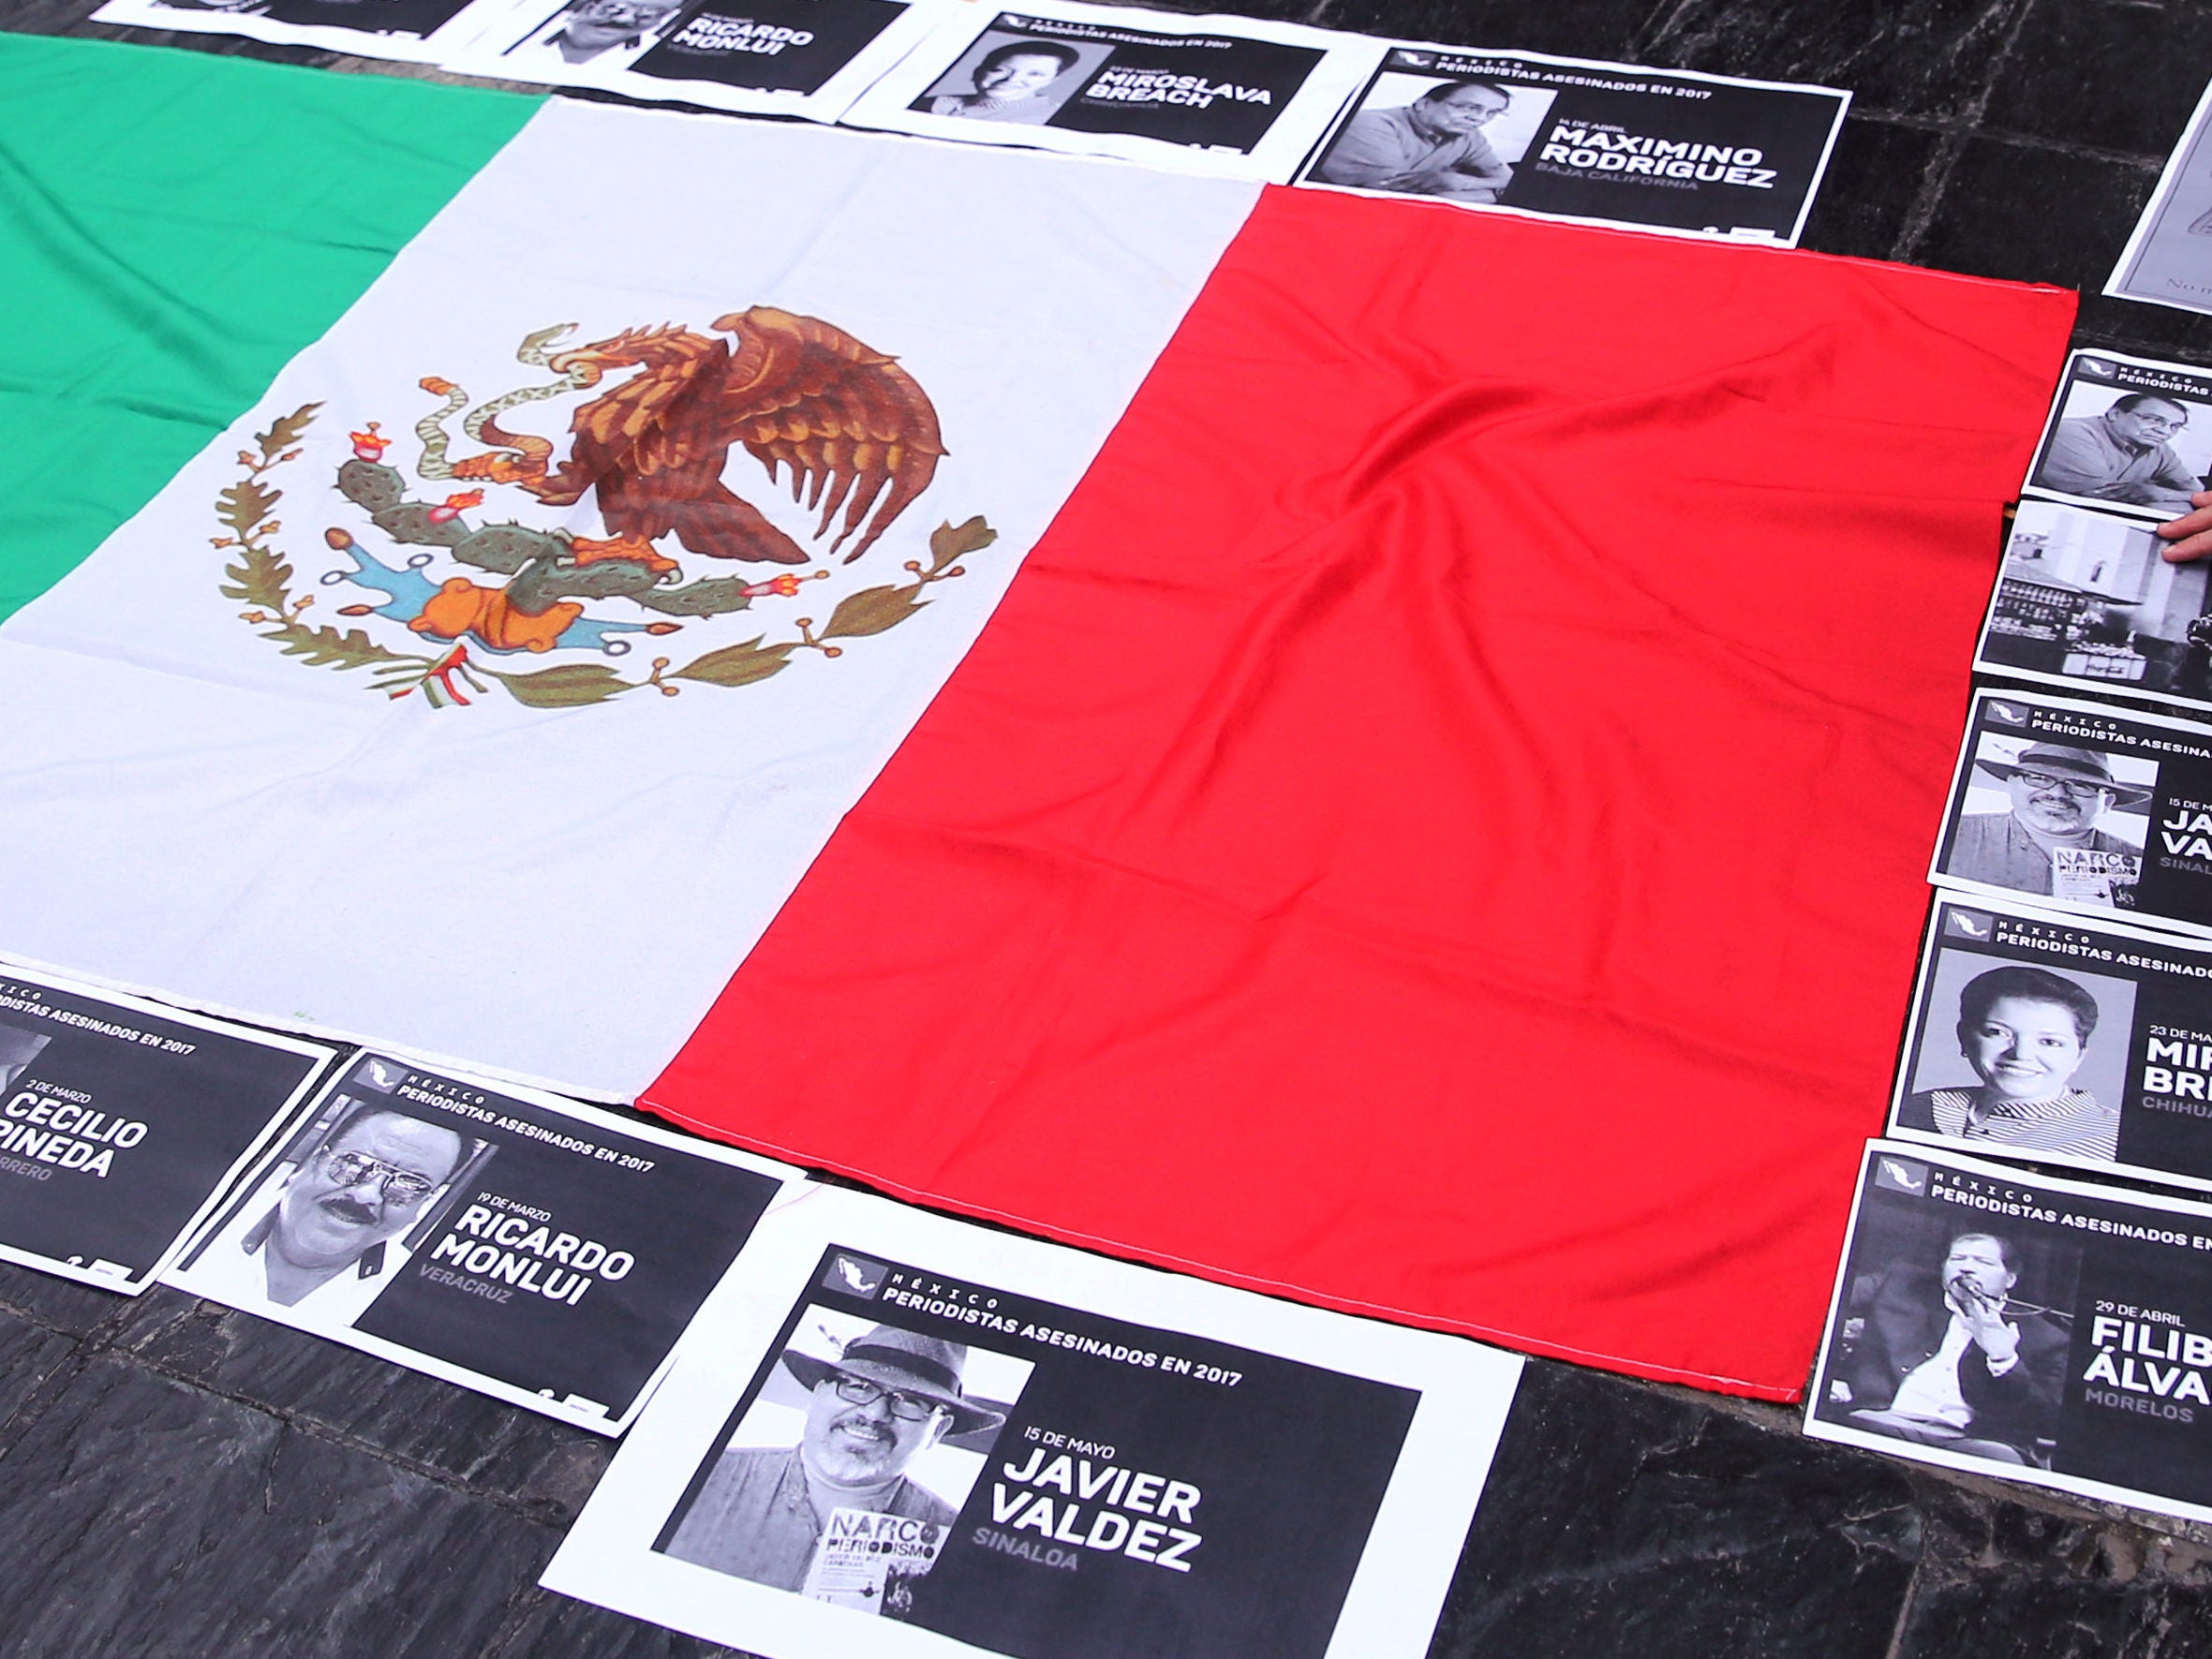 CPJ urges Mexico to fix 'press freedom crisis' after three journalists killed in four days